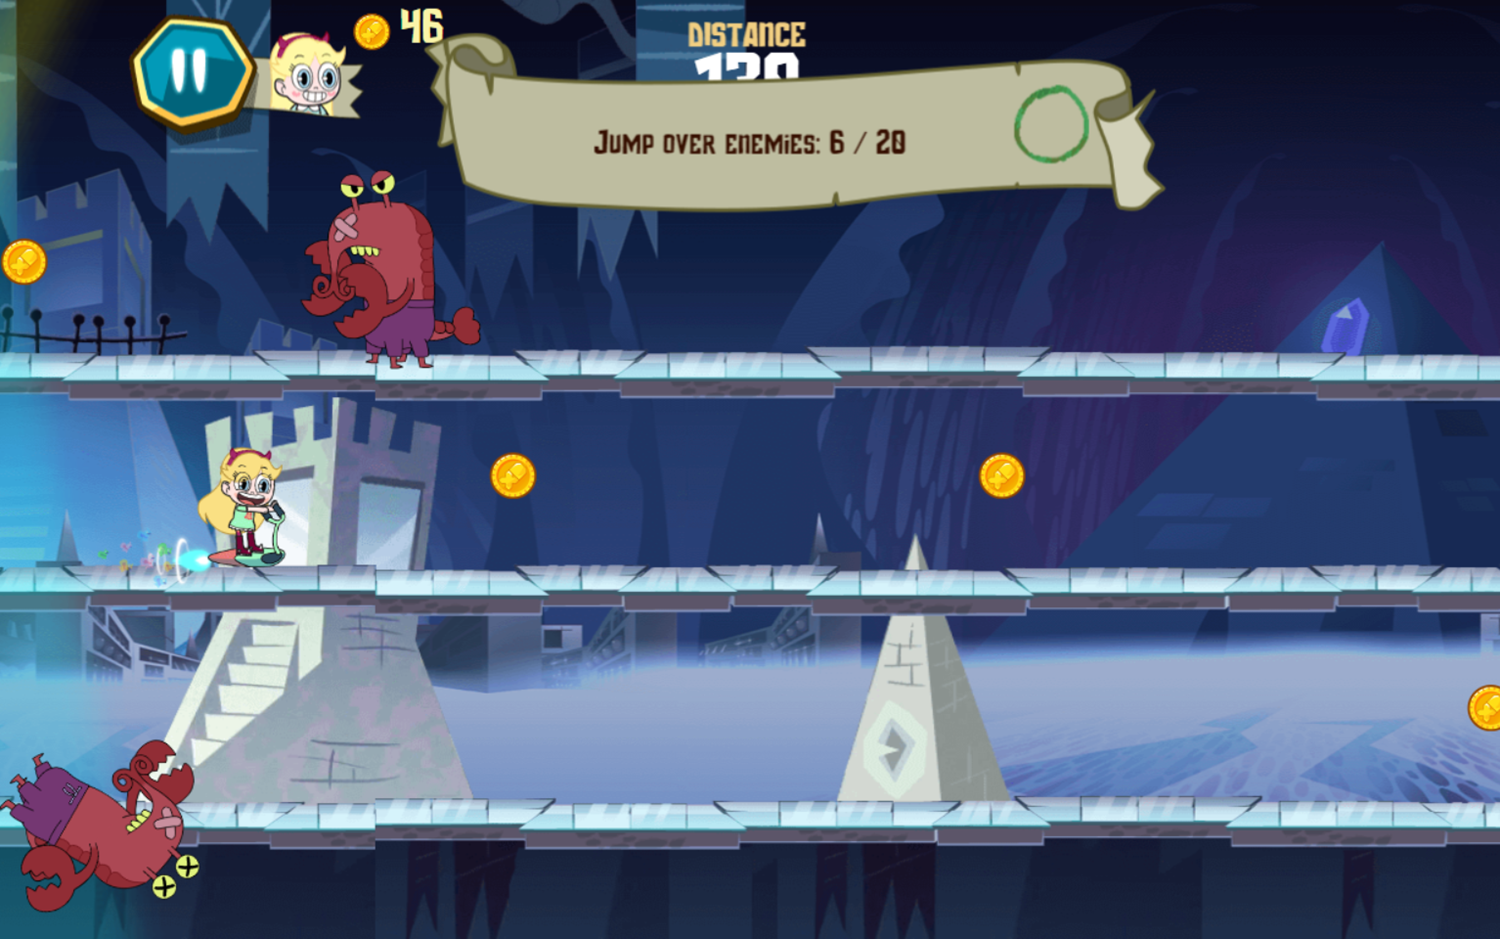 Star vs the Forces of Evil Quest Buy Rush Game Play Screenshot.